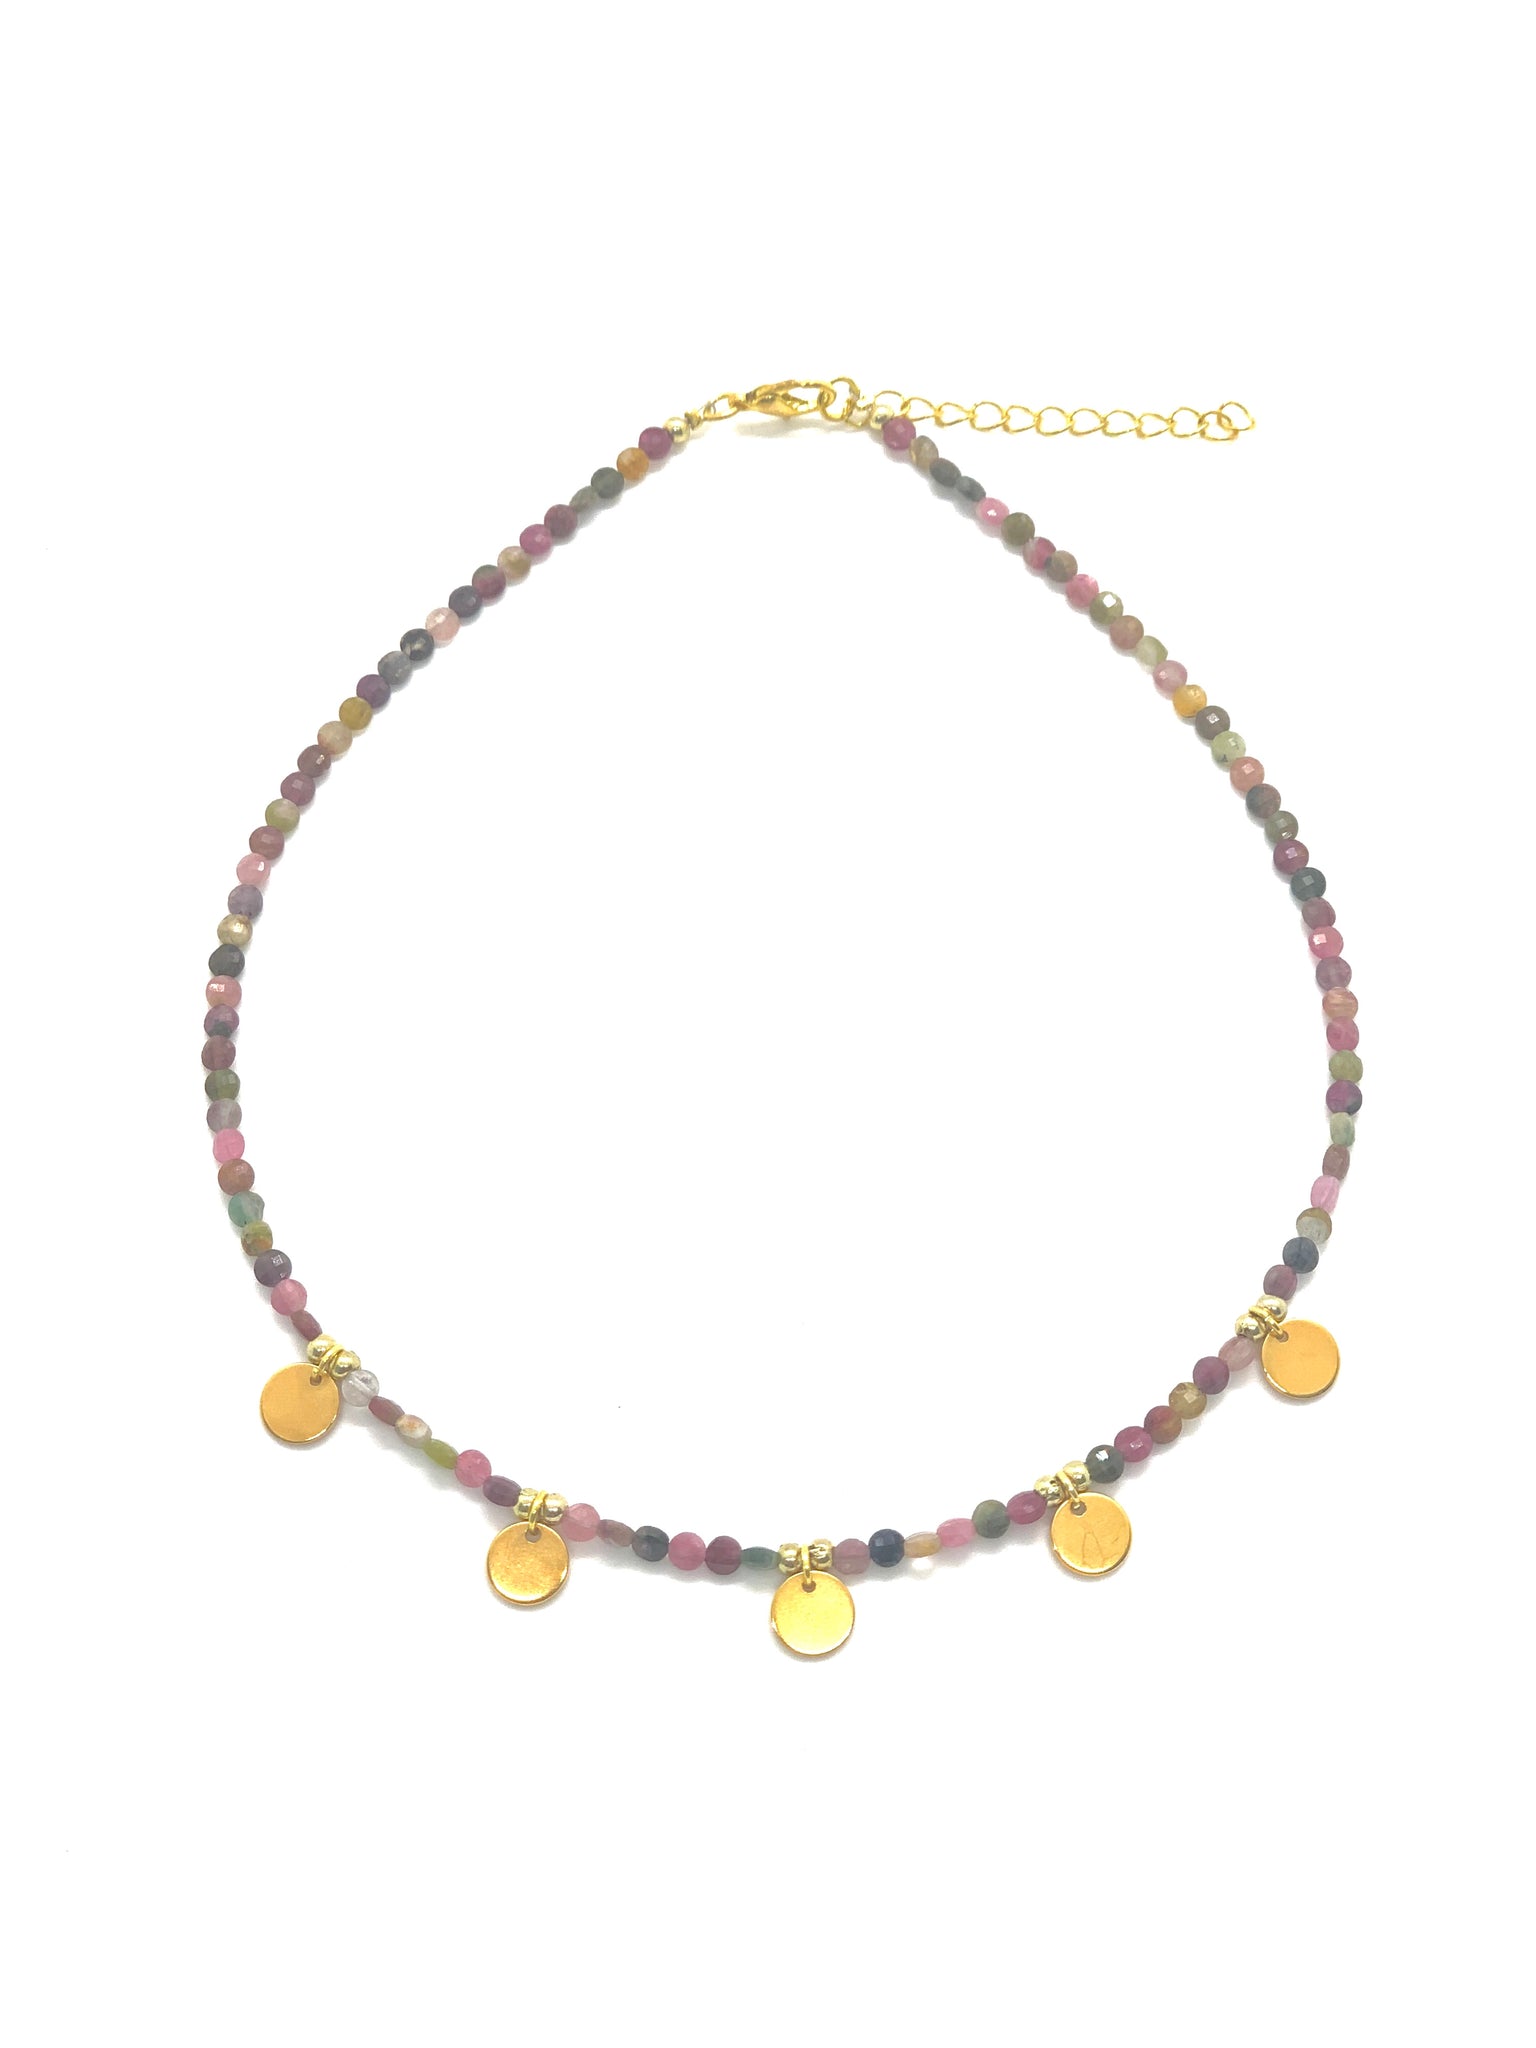 Short necklace with colourful natural minerals